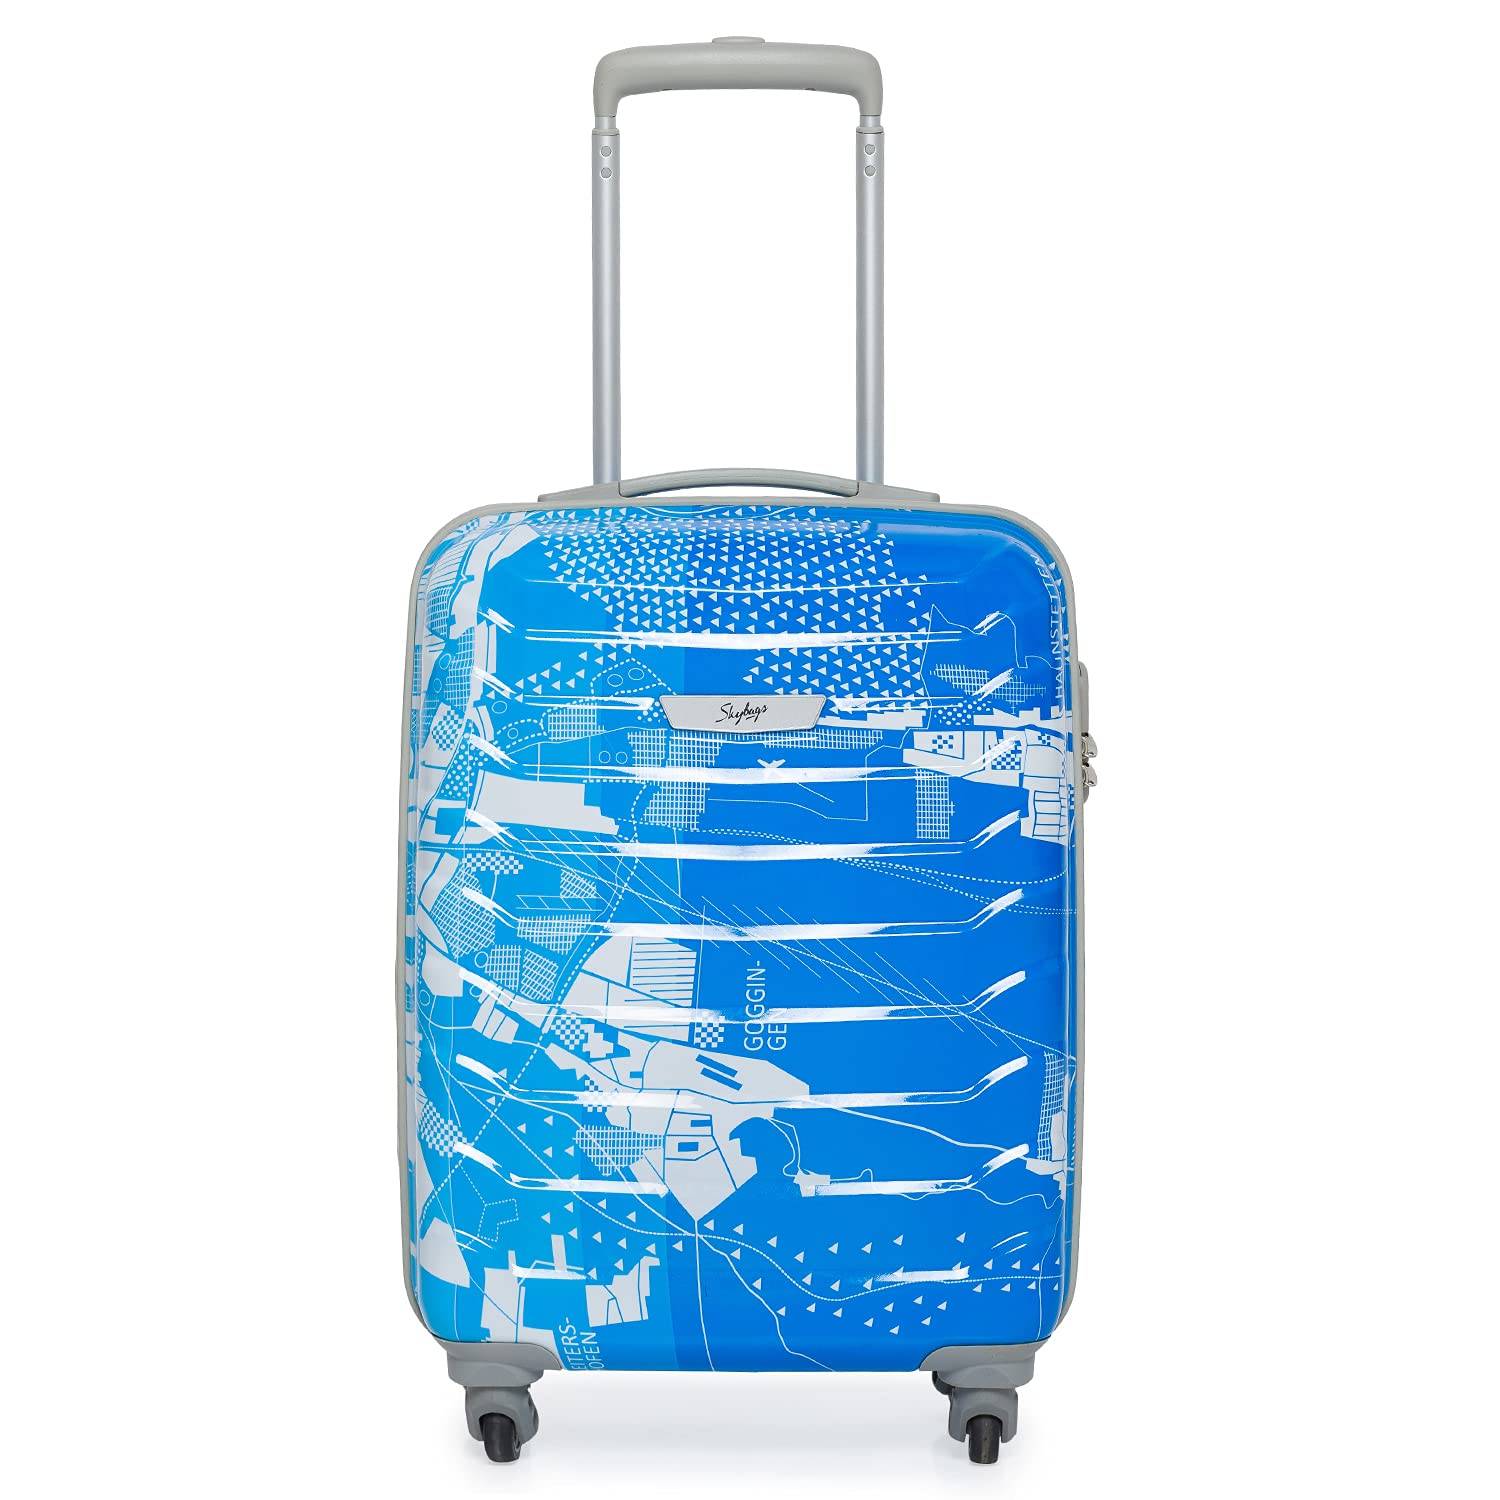 Small Trolley Bags - Buy Small Trolley Bags online in India